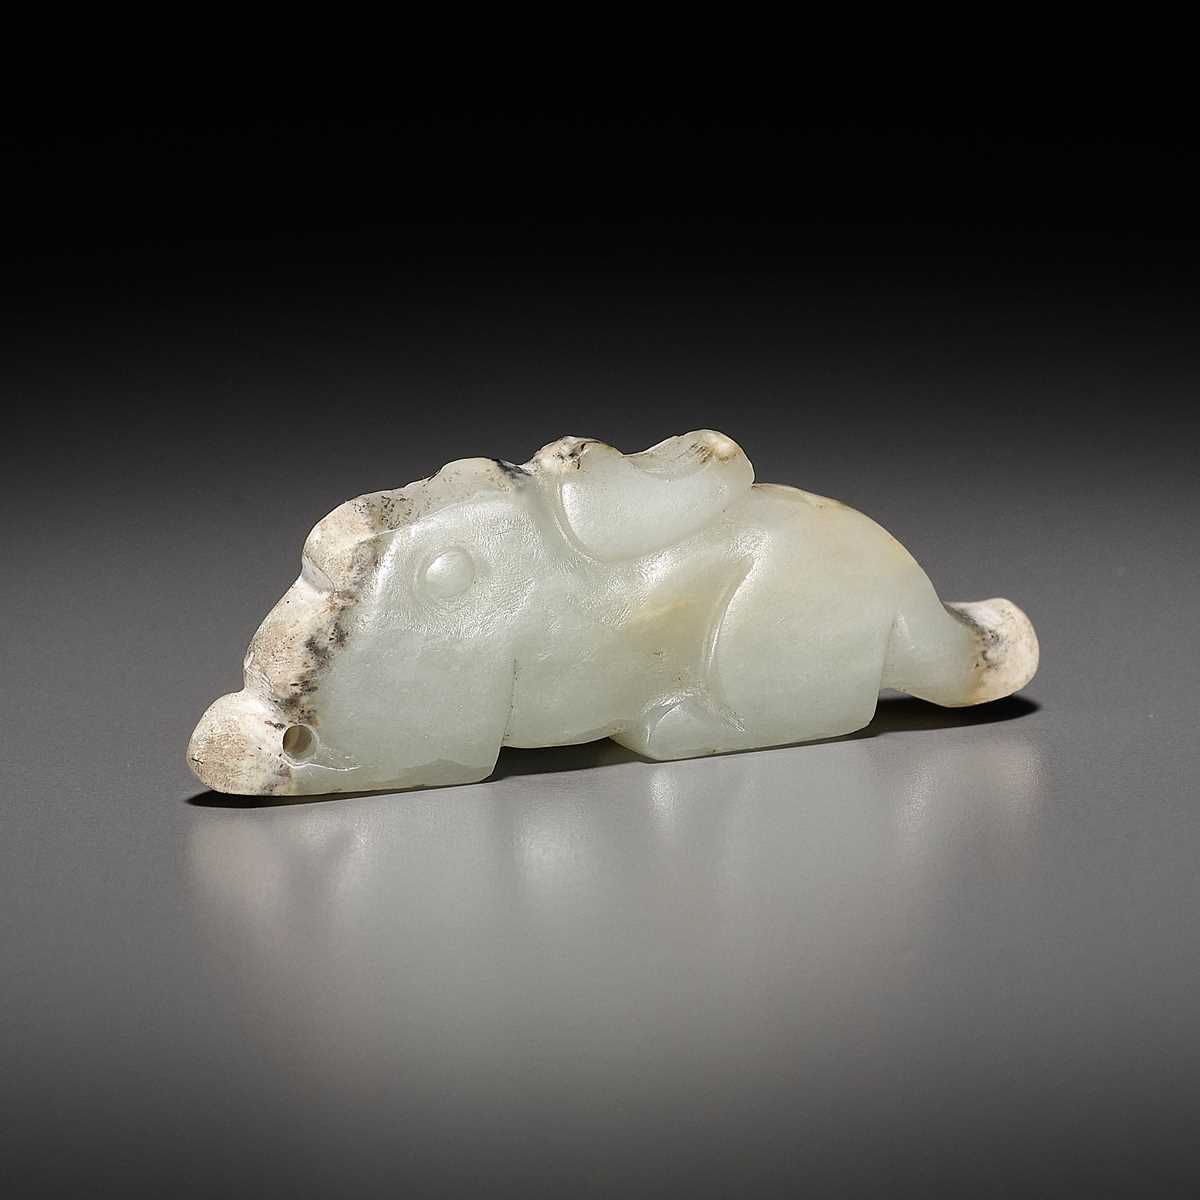 Lot 49 - A JADE ‘RABBIT’ PENDANT, LATE SHANG TO EARLY WESTERN ZHOU DYNASTY